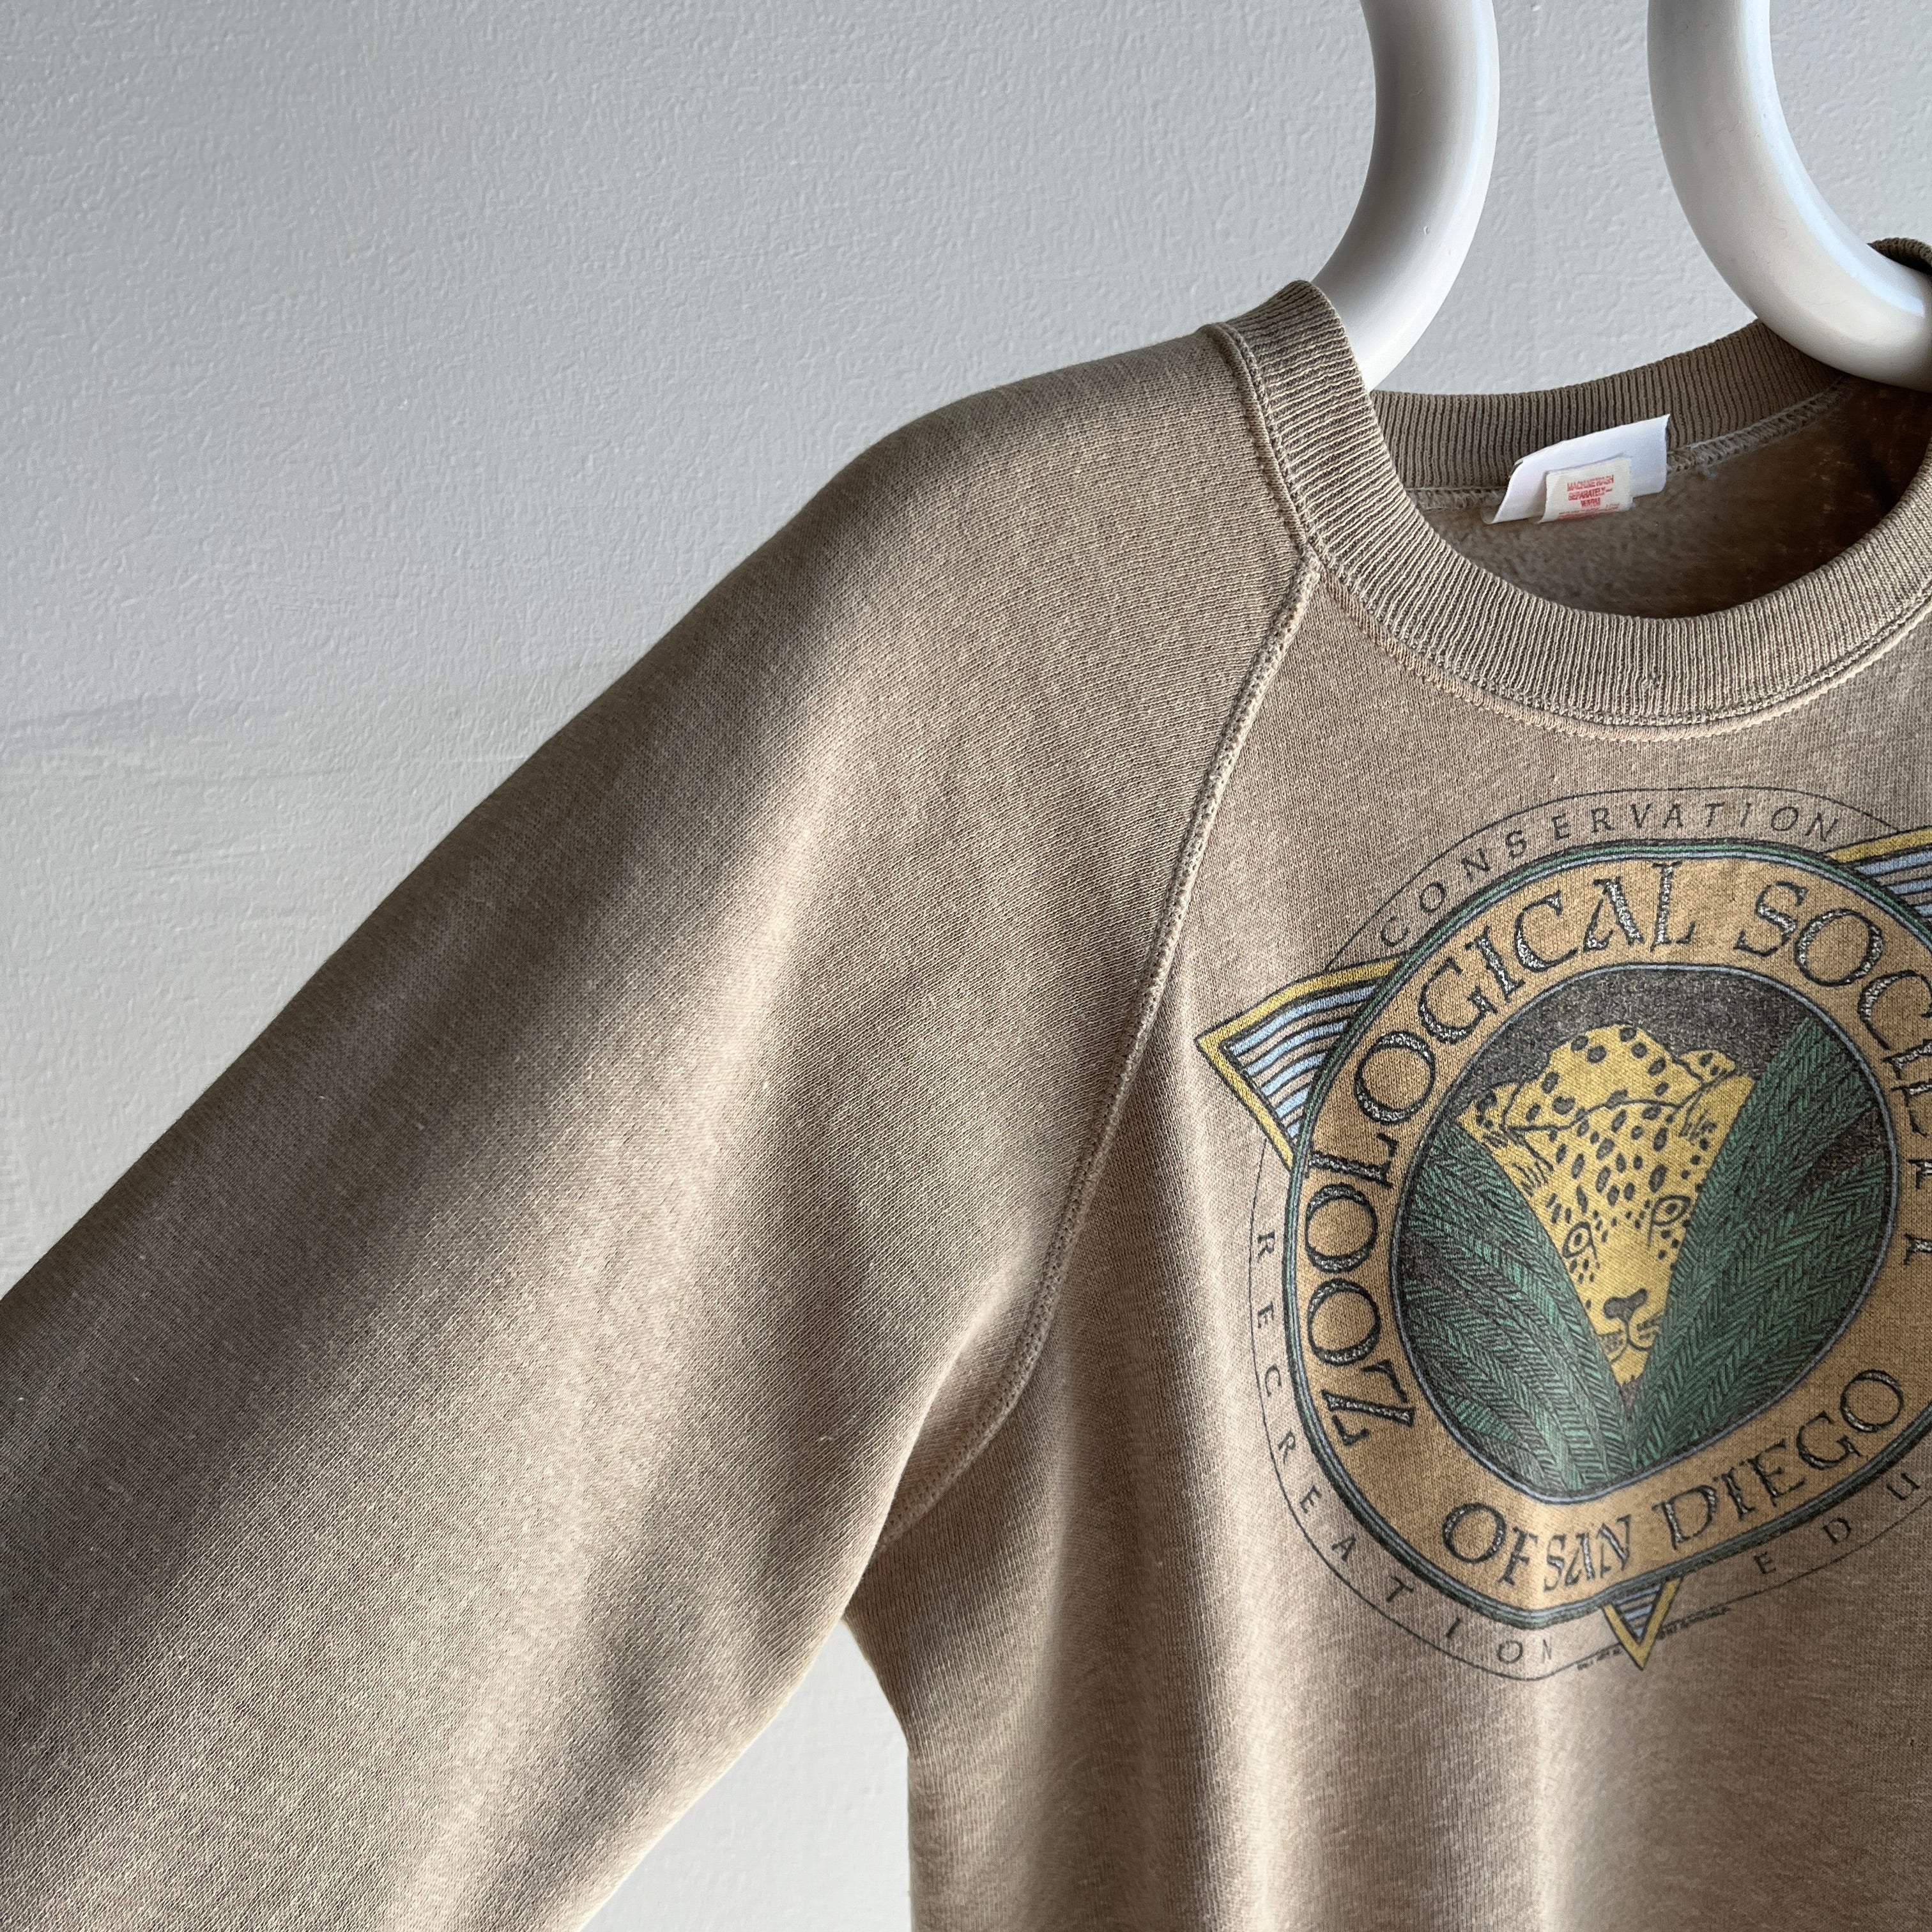 1987 Zoological Society of San Diego Sweatshirt with Mending